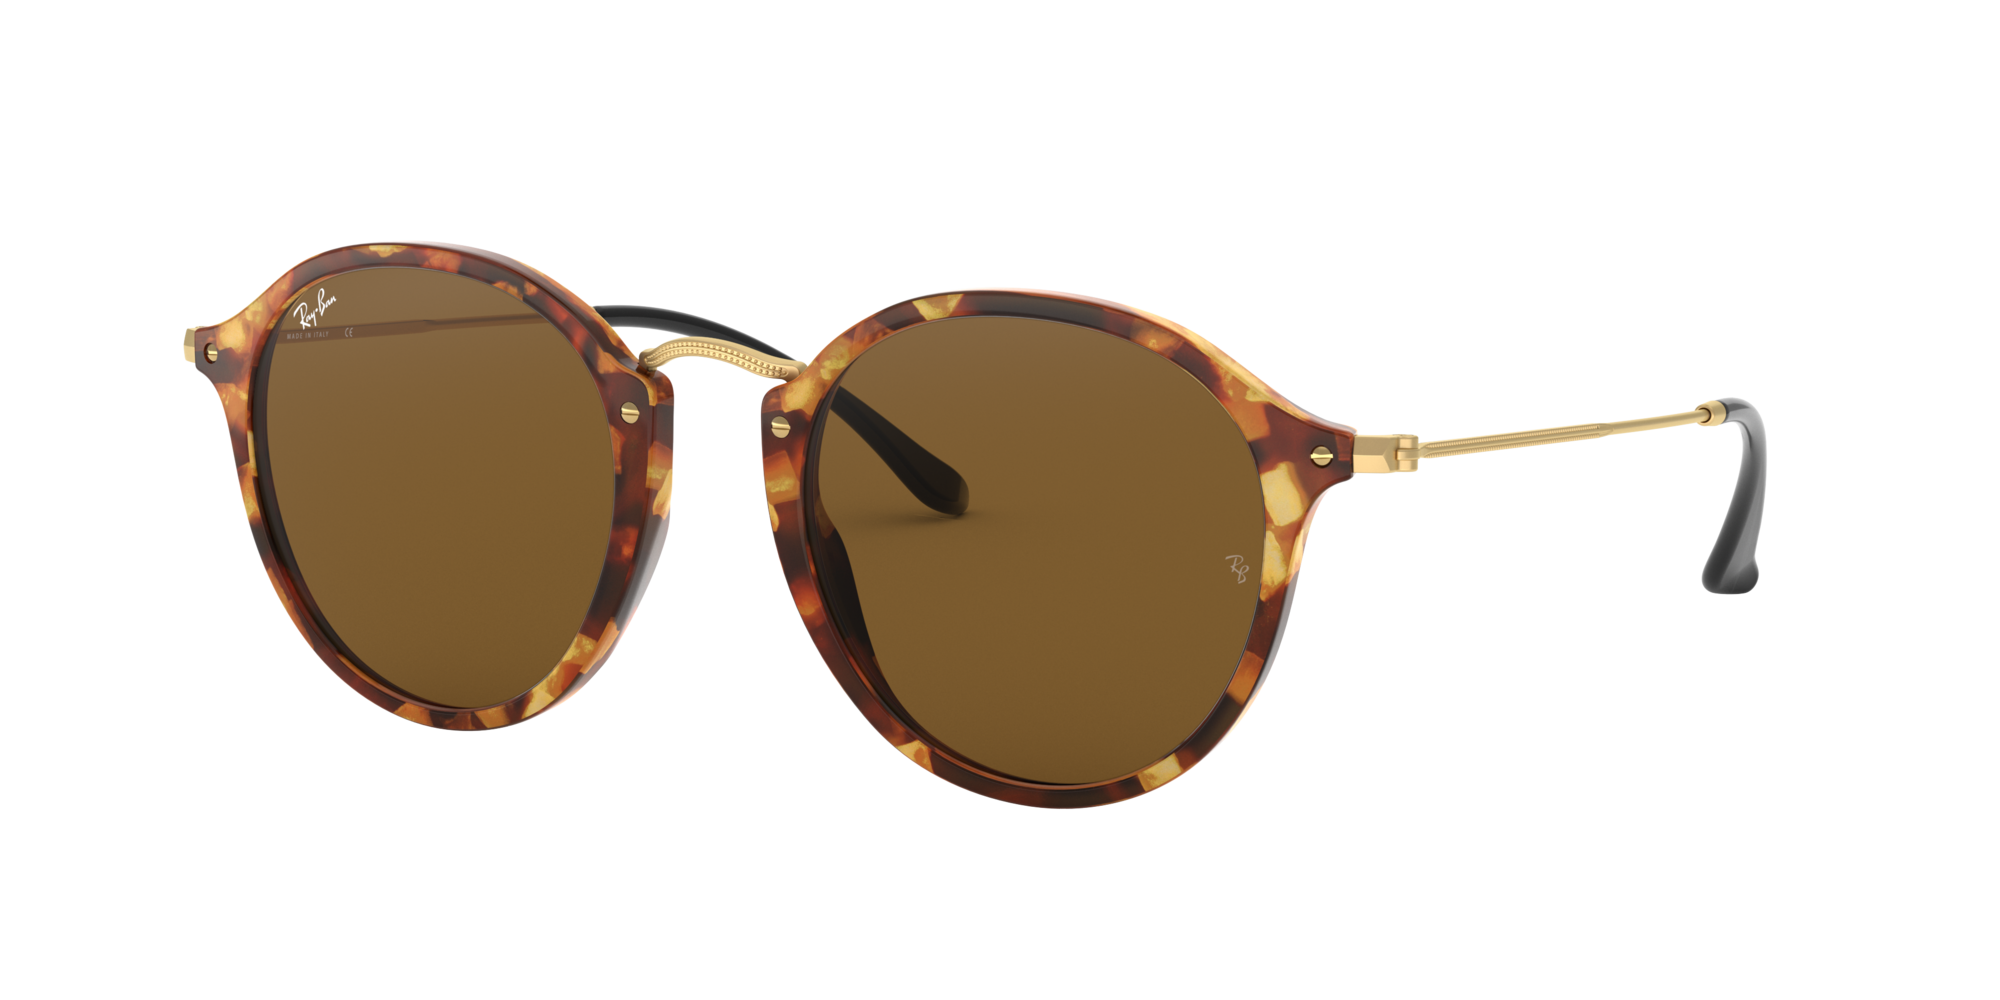 ray ban round rb2447